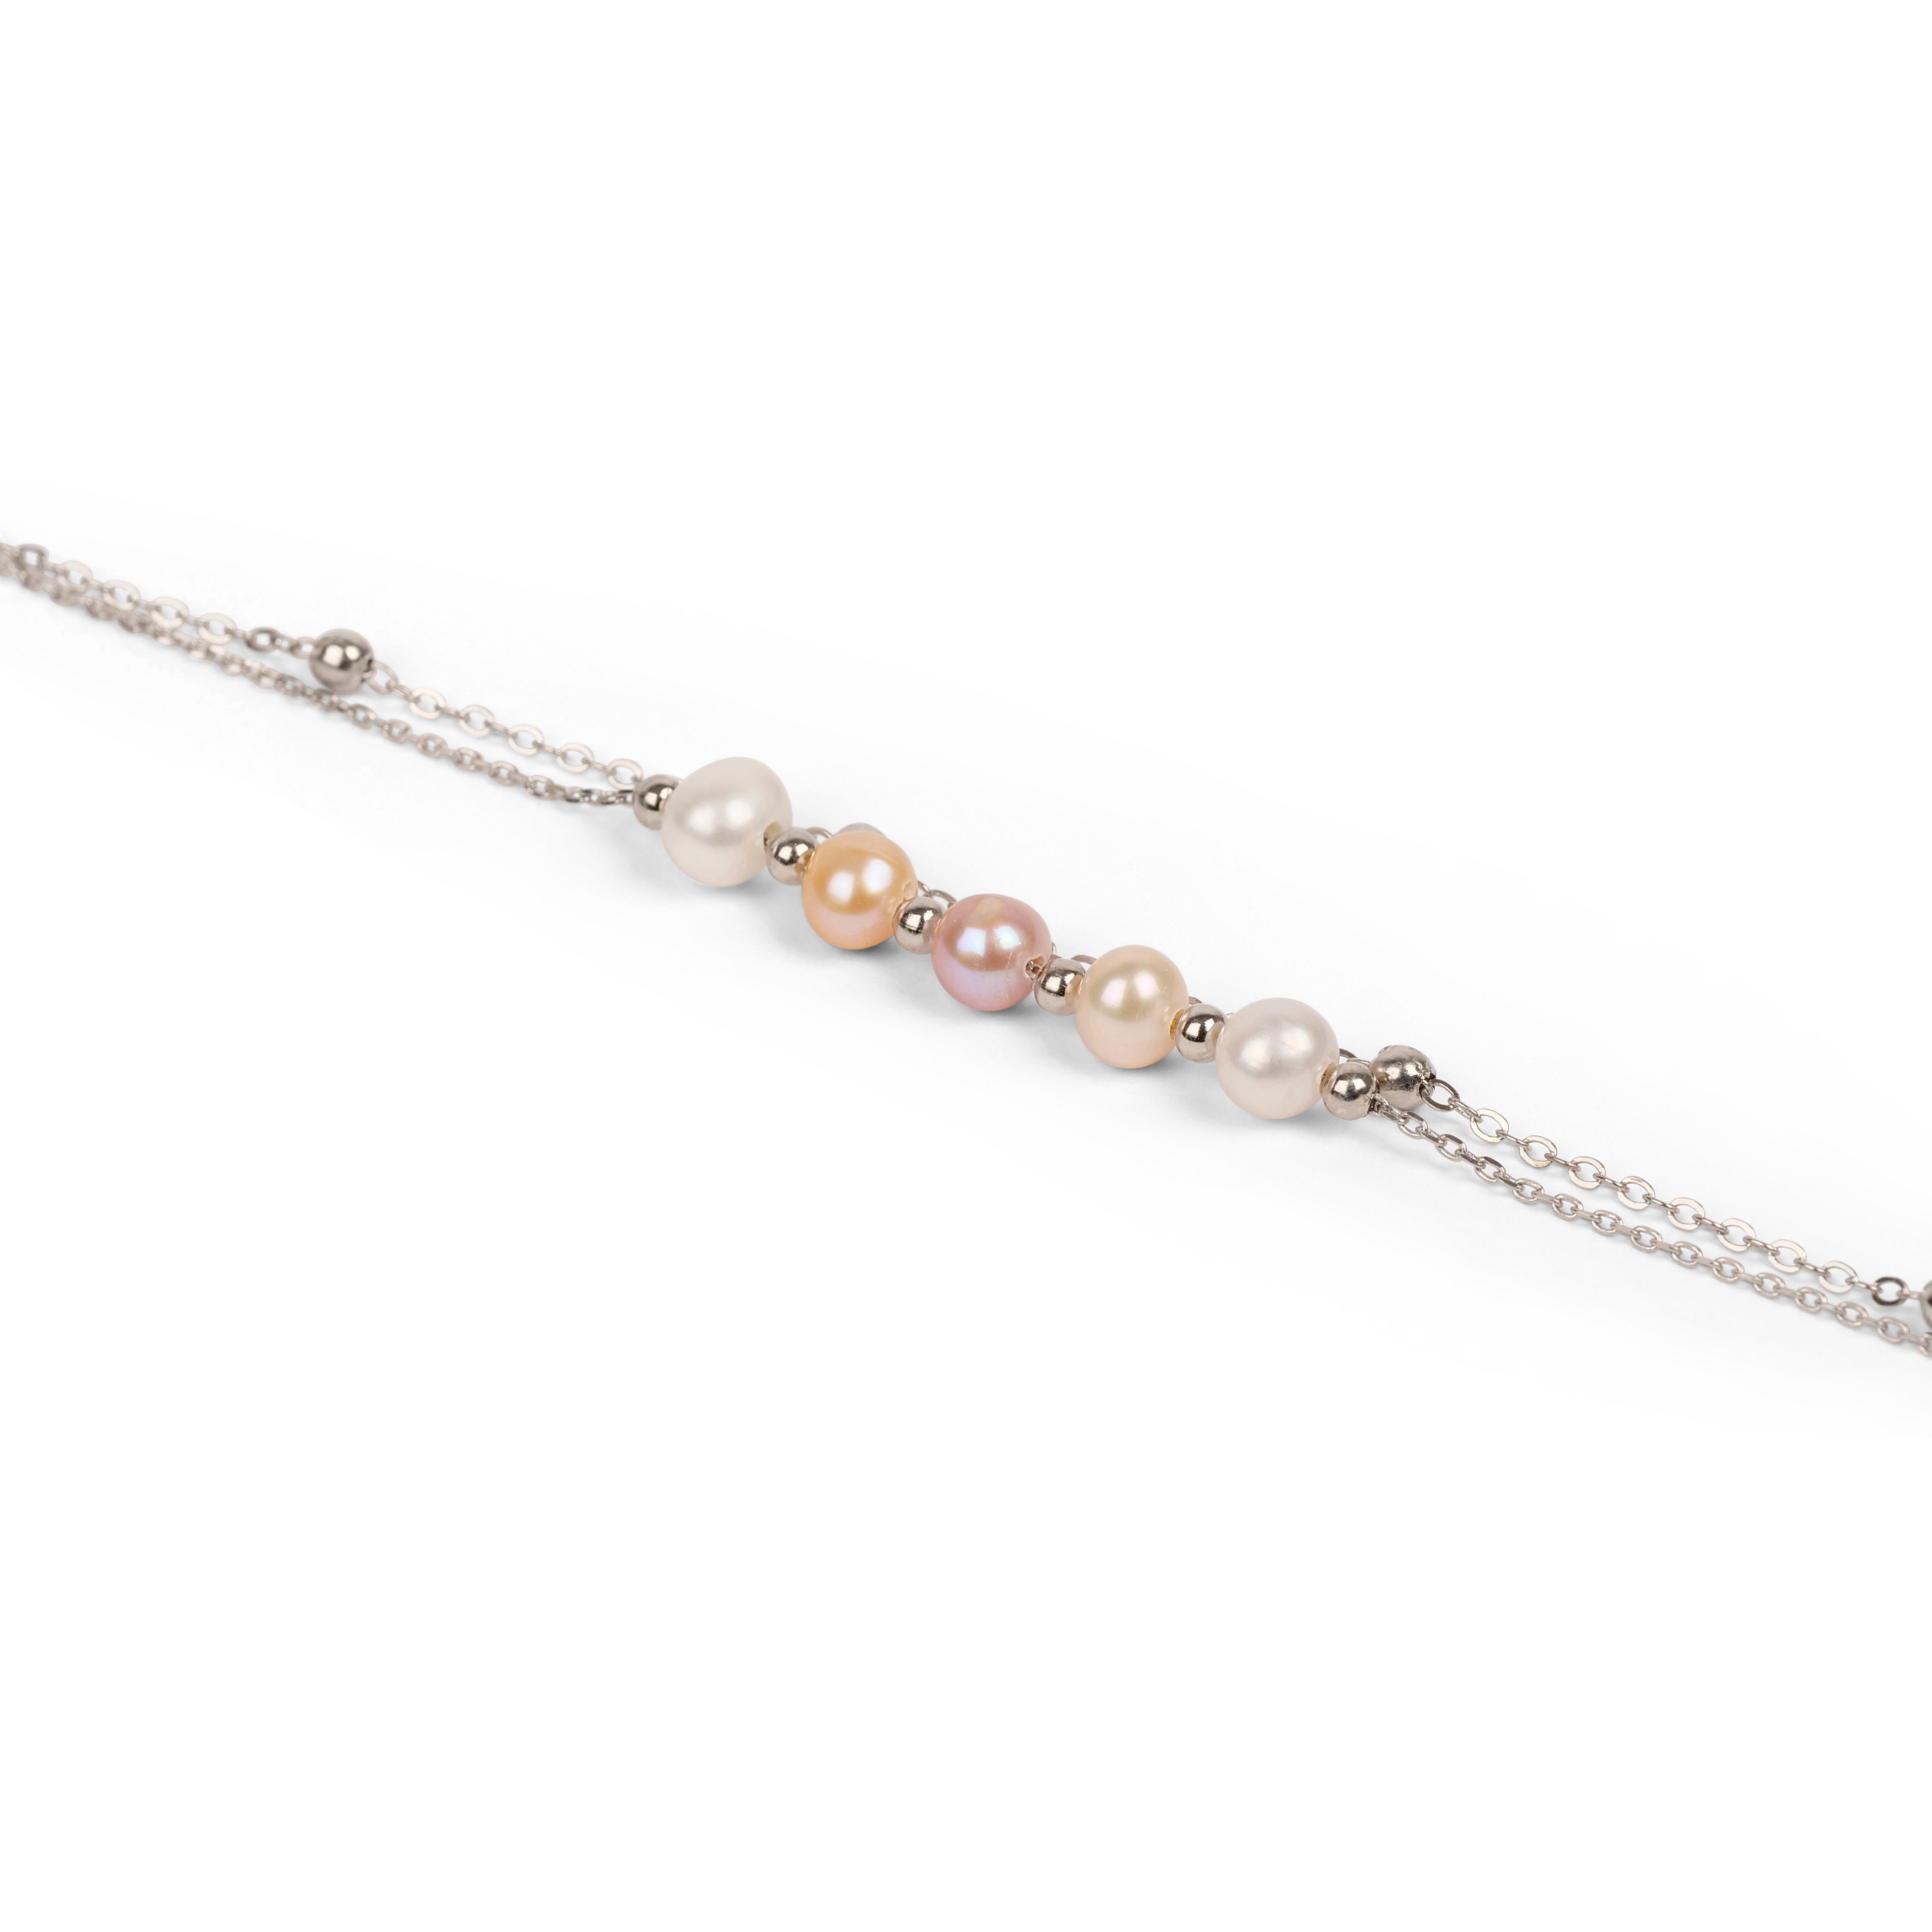 Multi Pearl and Double Chain Bracelet